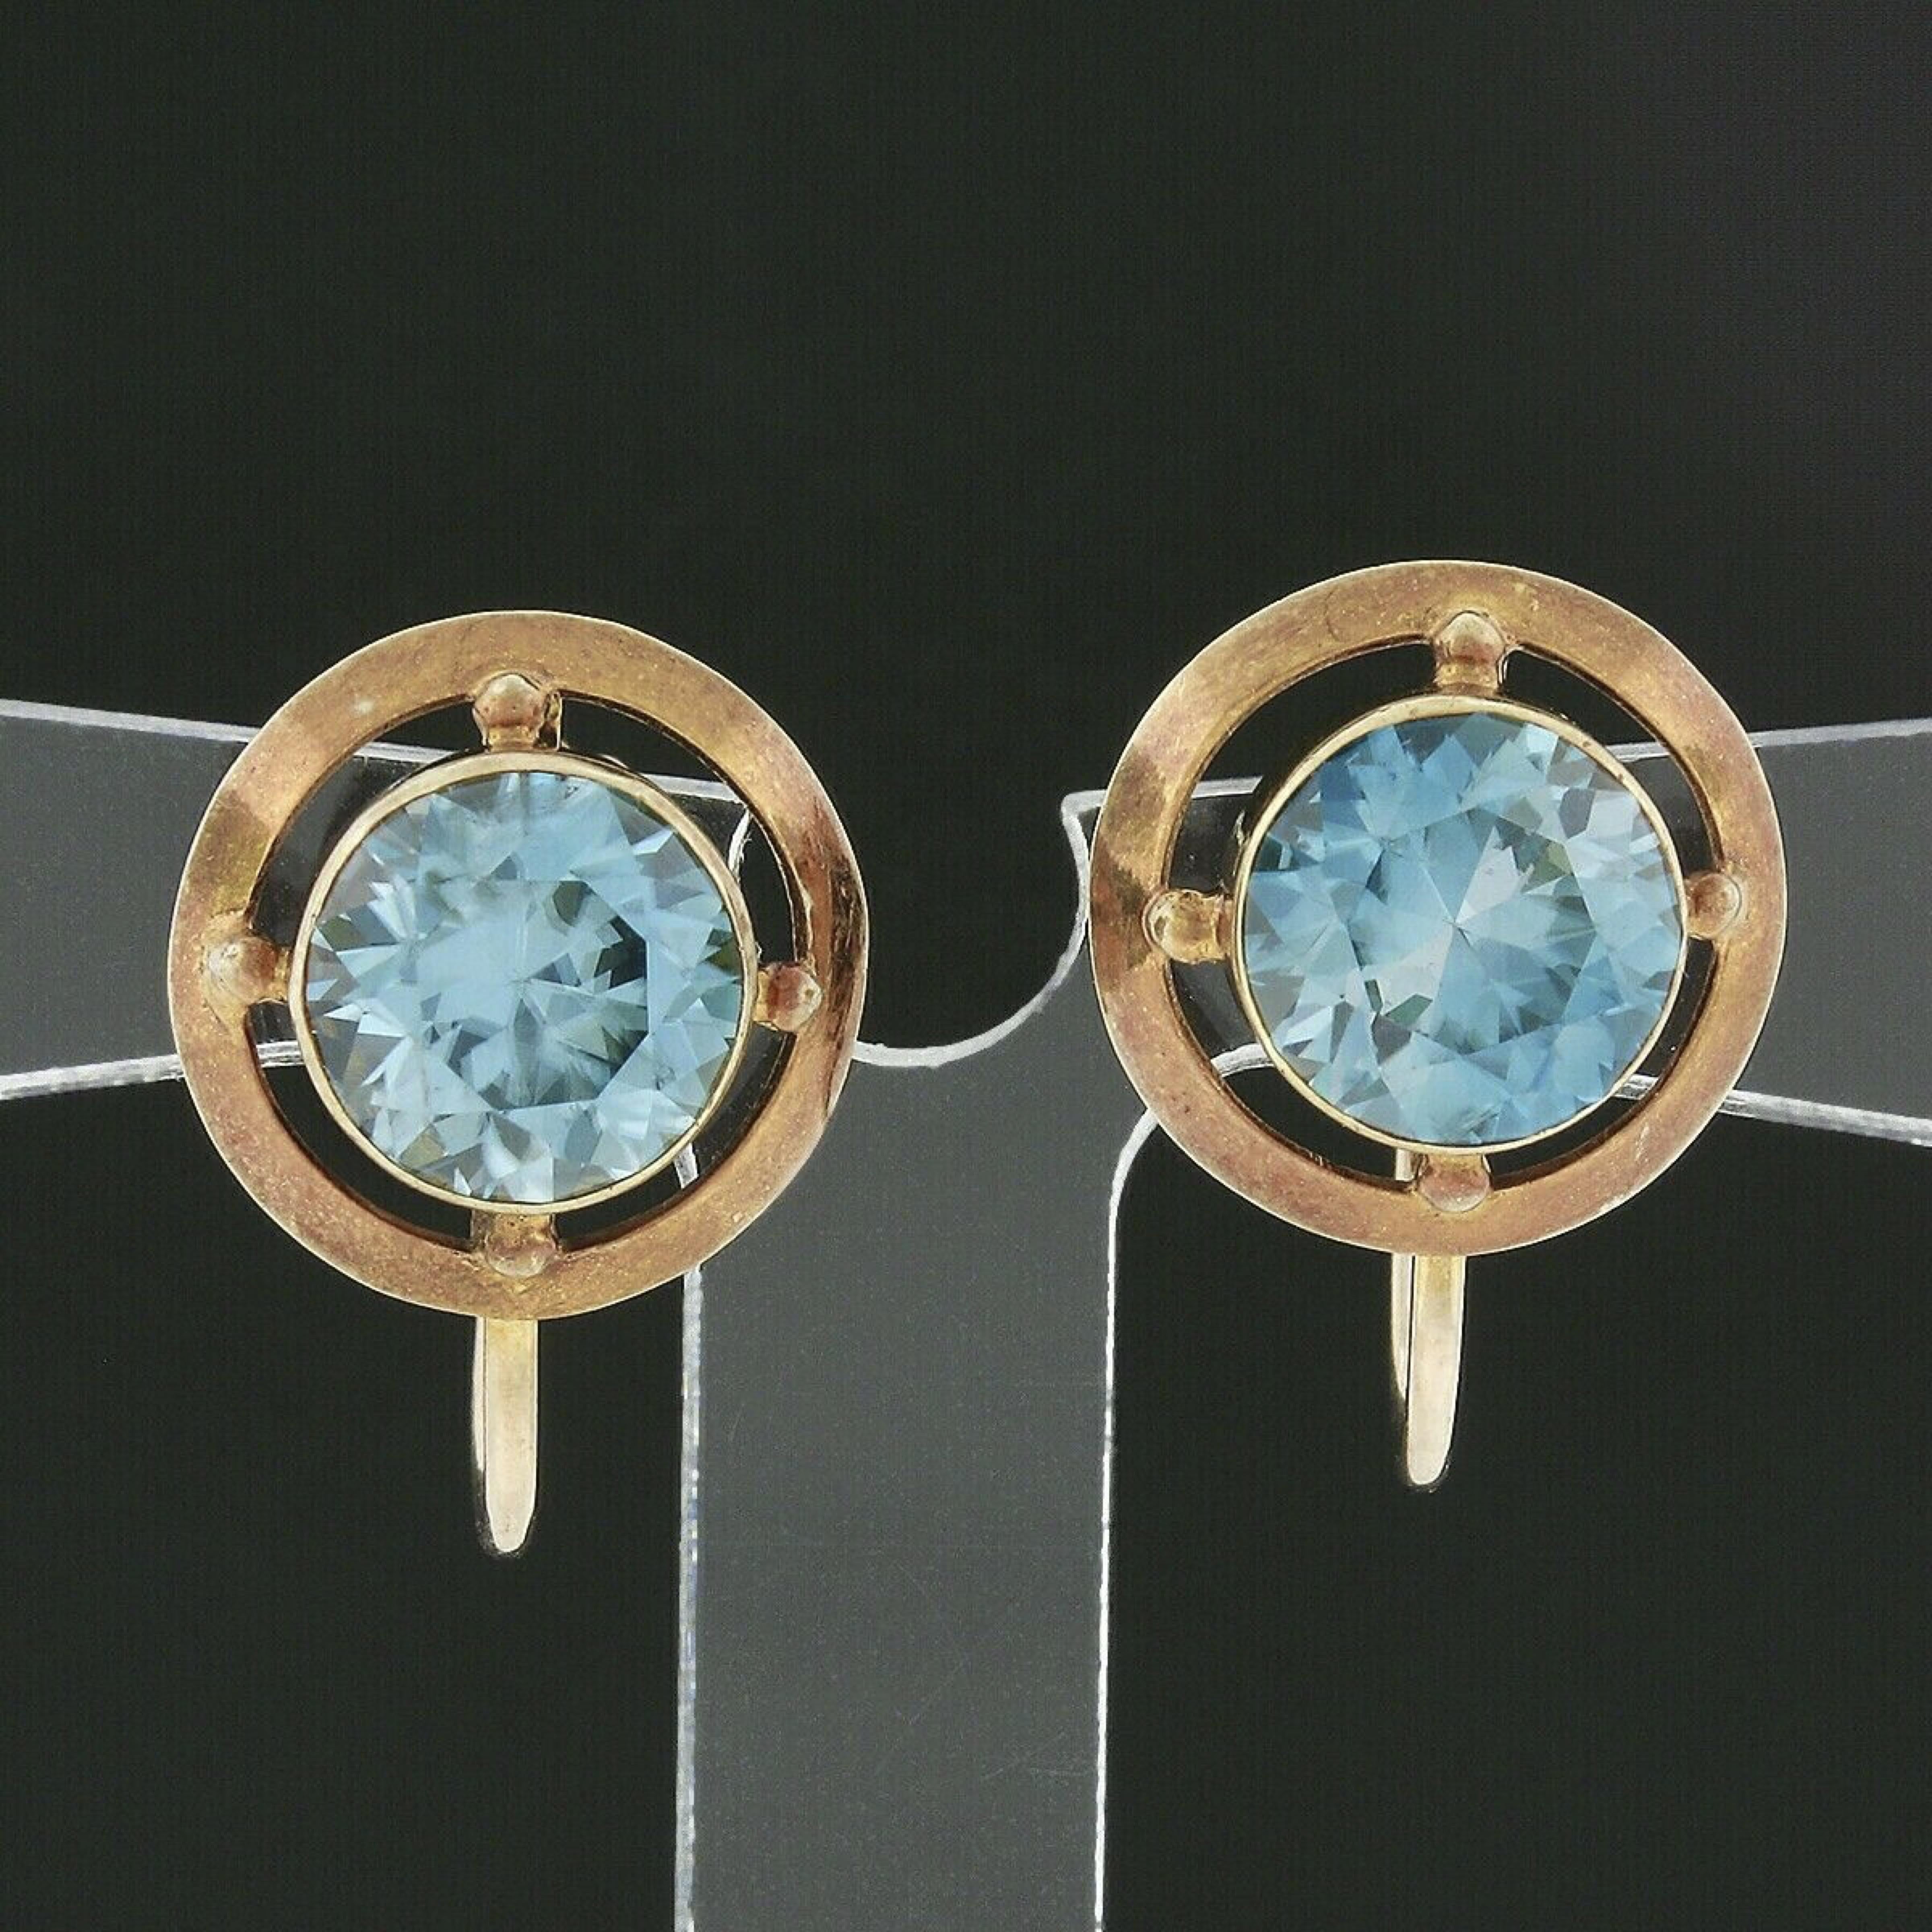 This superb pair of antique earrings was crafted from solid 14k yellow gold and feature a gorgeous blue zircon neatly bezel set at their center. These old round cut stones display a nice large size, totaling approximately 5 carats in weight, and